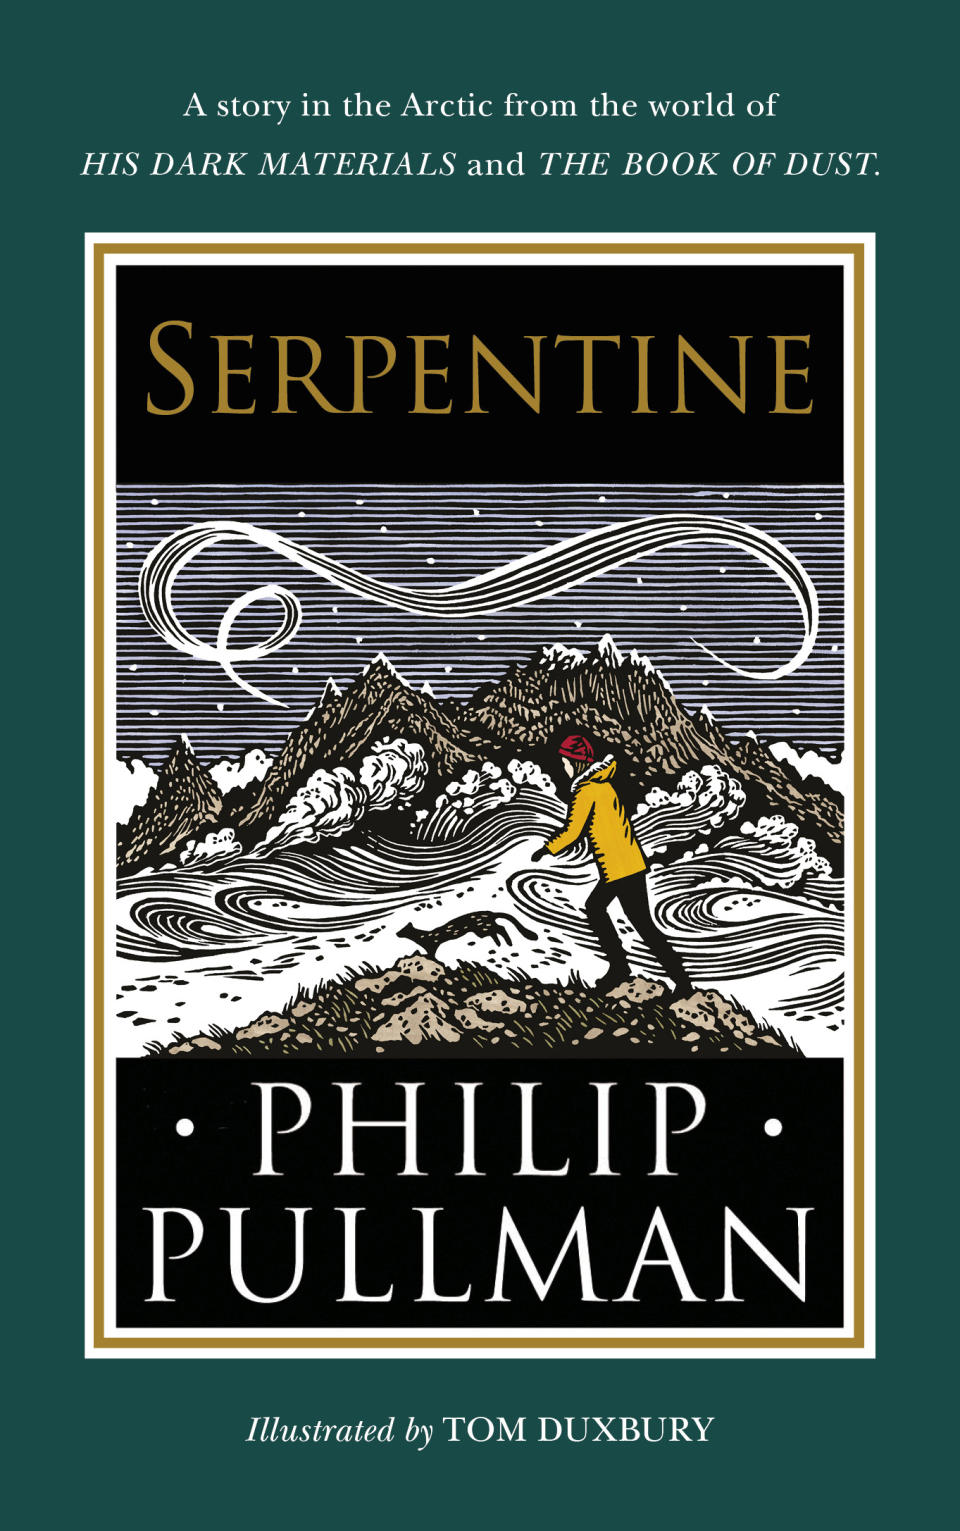 Serpentine by Sir Philip Pullman is to be illustrated by Tom Duxbury